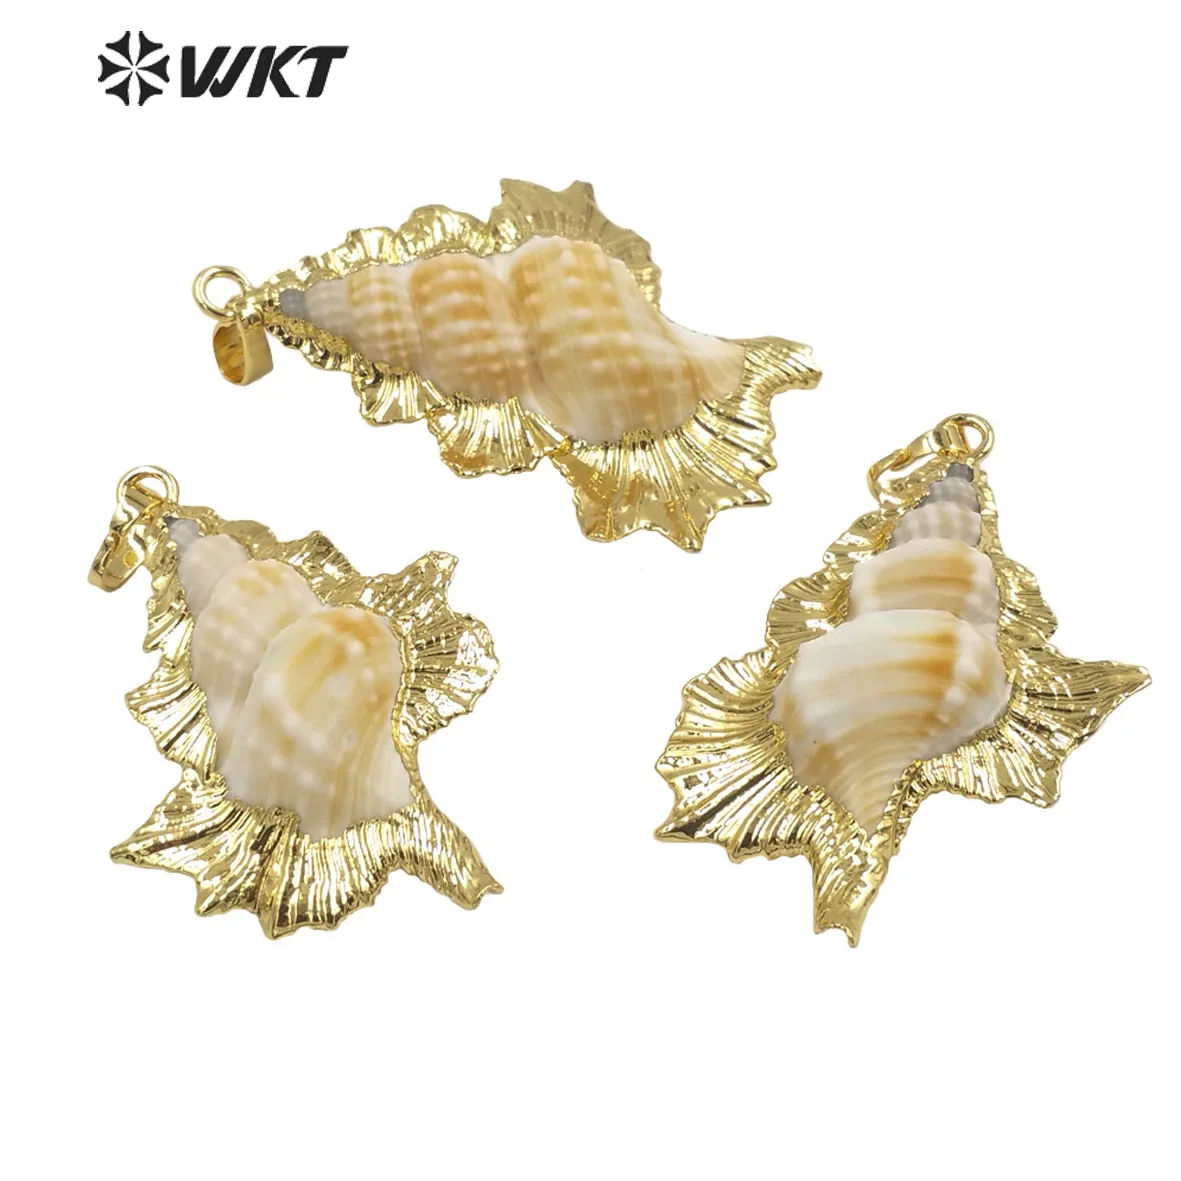 

WT-JP352 WKT 2023 Newest Style Trumpet Shell Pendant Women Jewelry Fashion Accessory Gifts For Party Trend